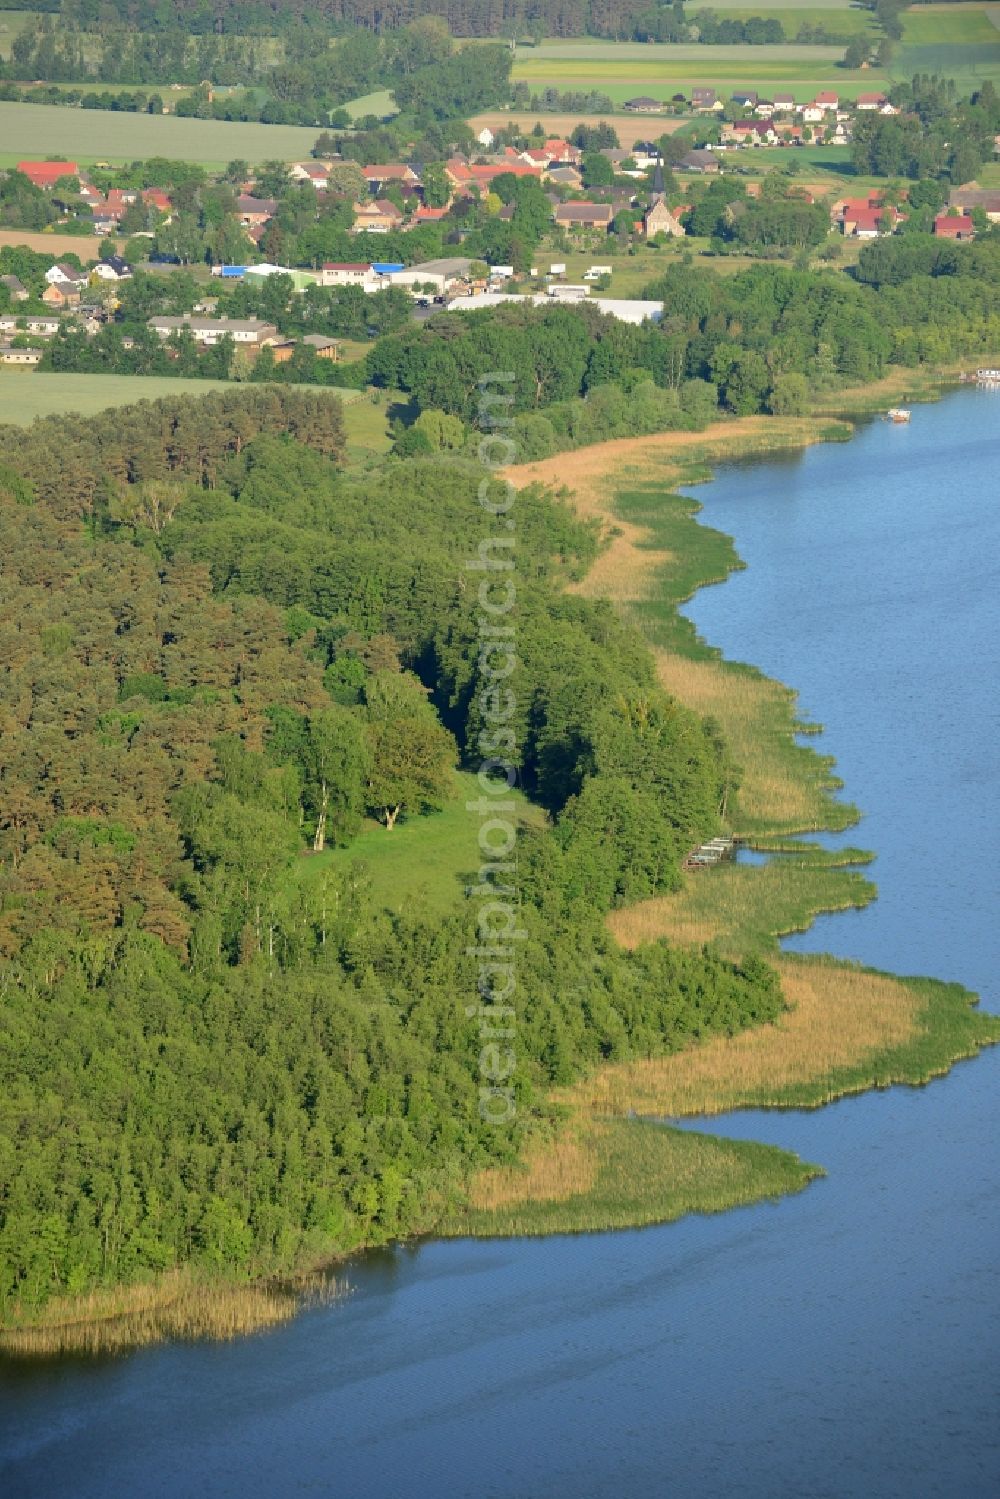 Aerial image Löwenberger Land - Shores of Dreetzsee lake in the borough of Loewenberger Land in the state of Brandenburg. The lake is surrounded by trees and forest, the next village is the Grueneberg part of the borough. The background shows the Teschendorf part